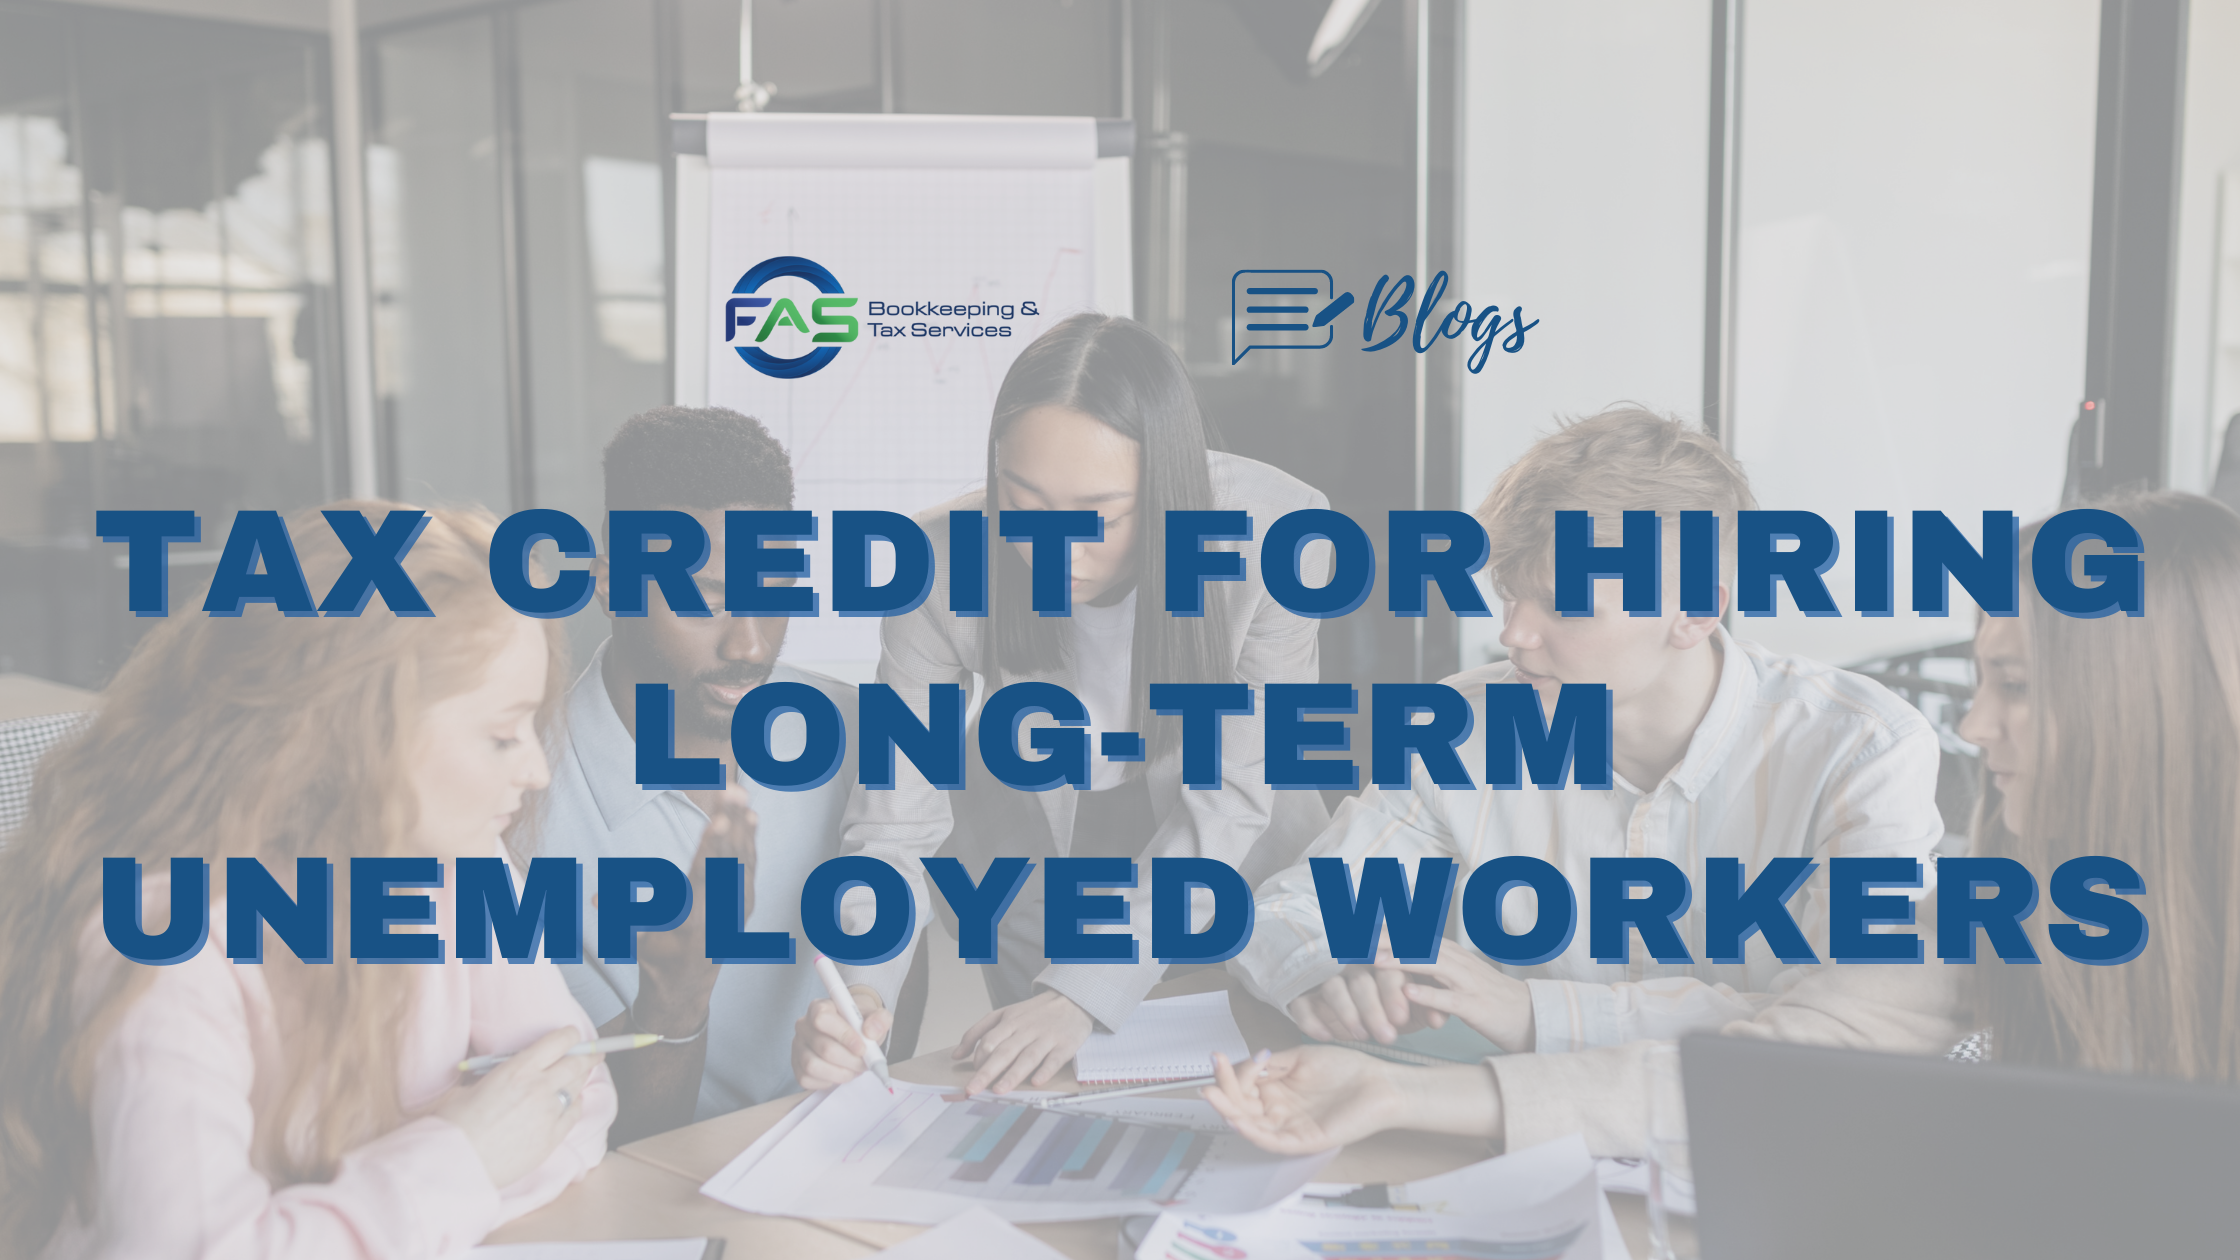 Tax Credit for Hiring Long-term Unemployed Workers